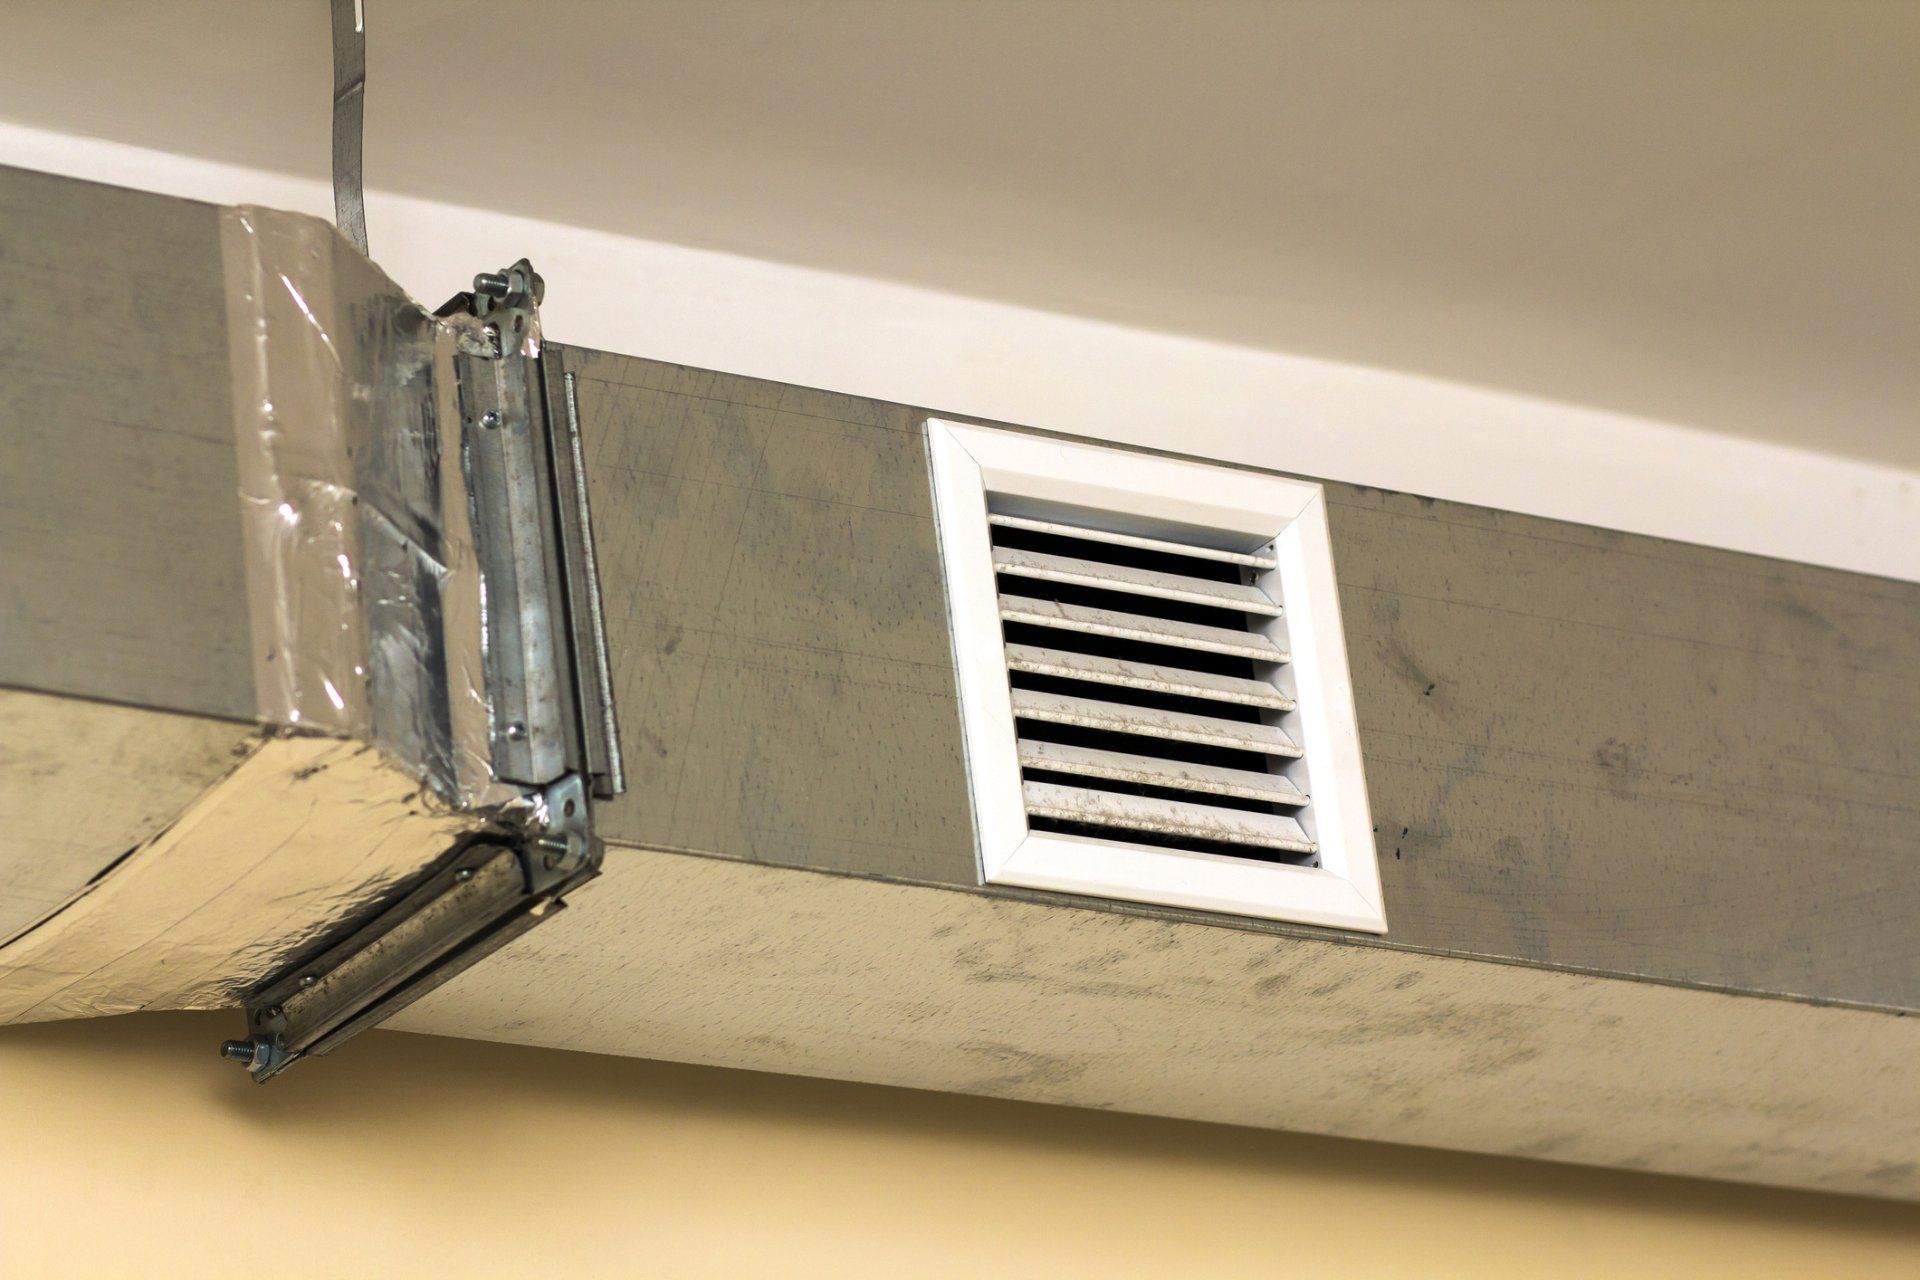 Dry Vent Cleaning — White Ventilation On A Metal Tube in Pittsburgh, PA